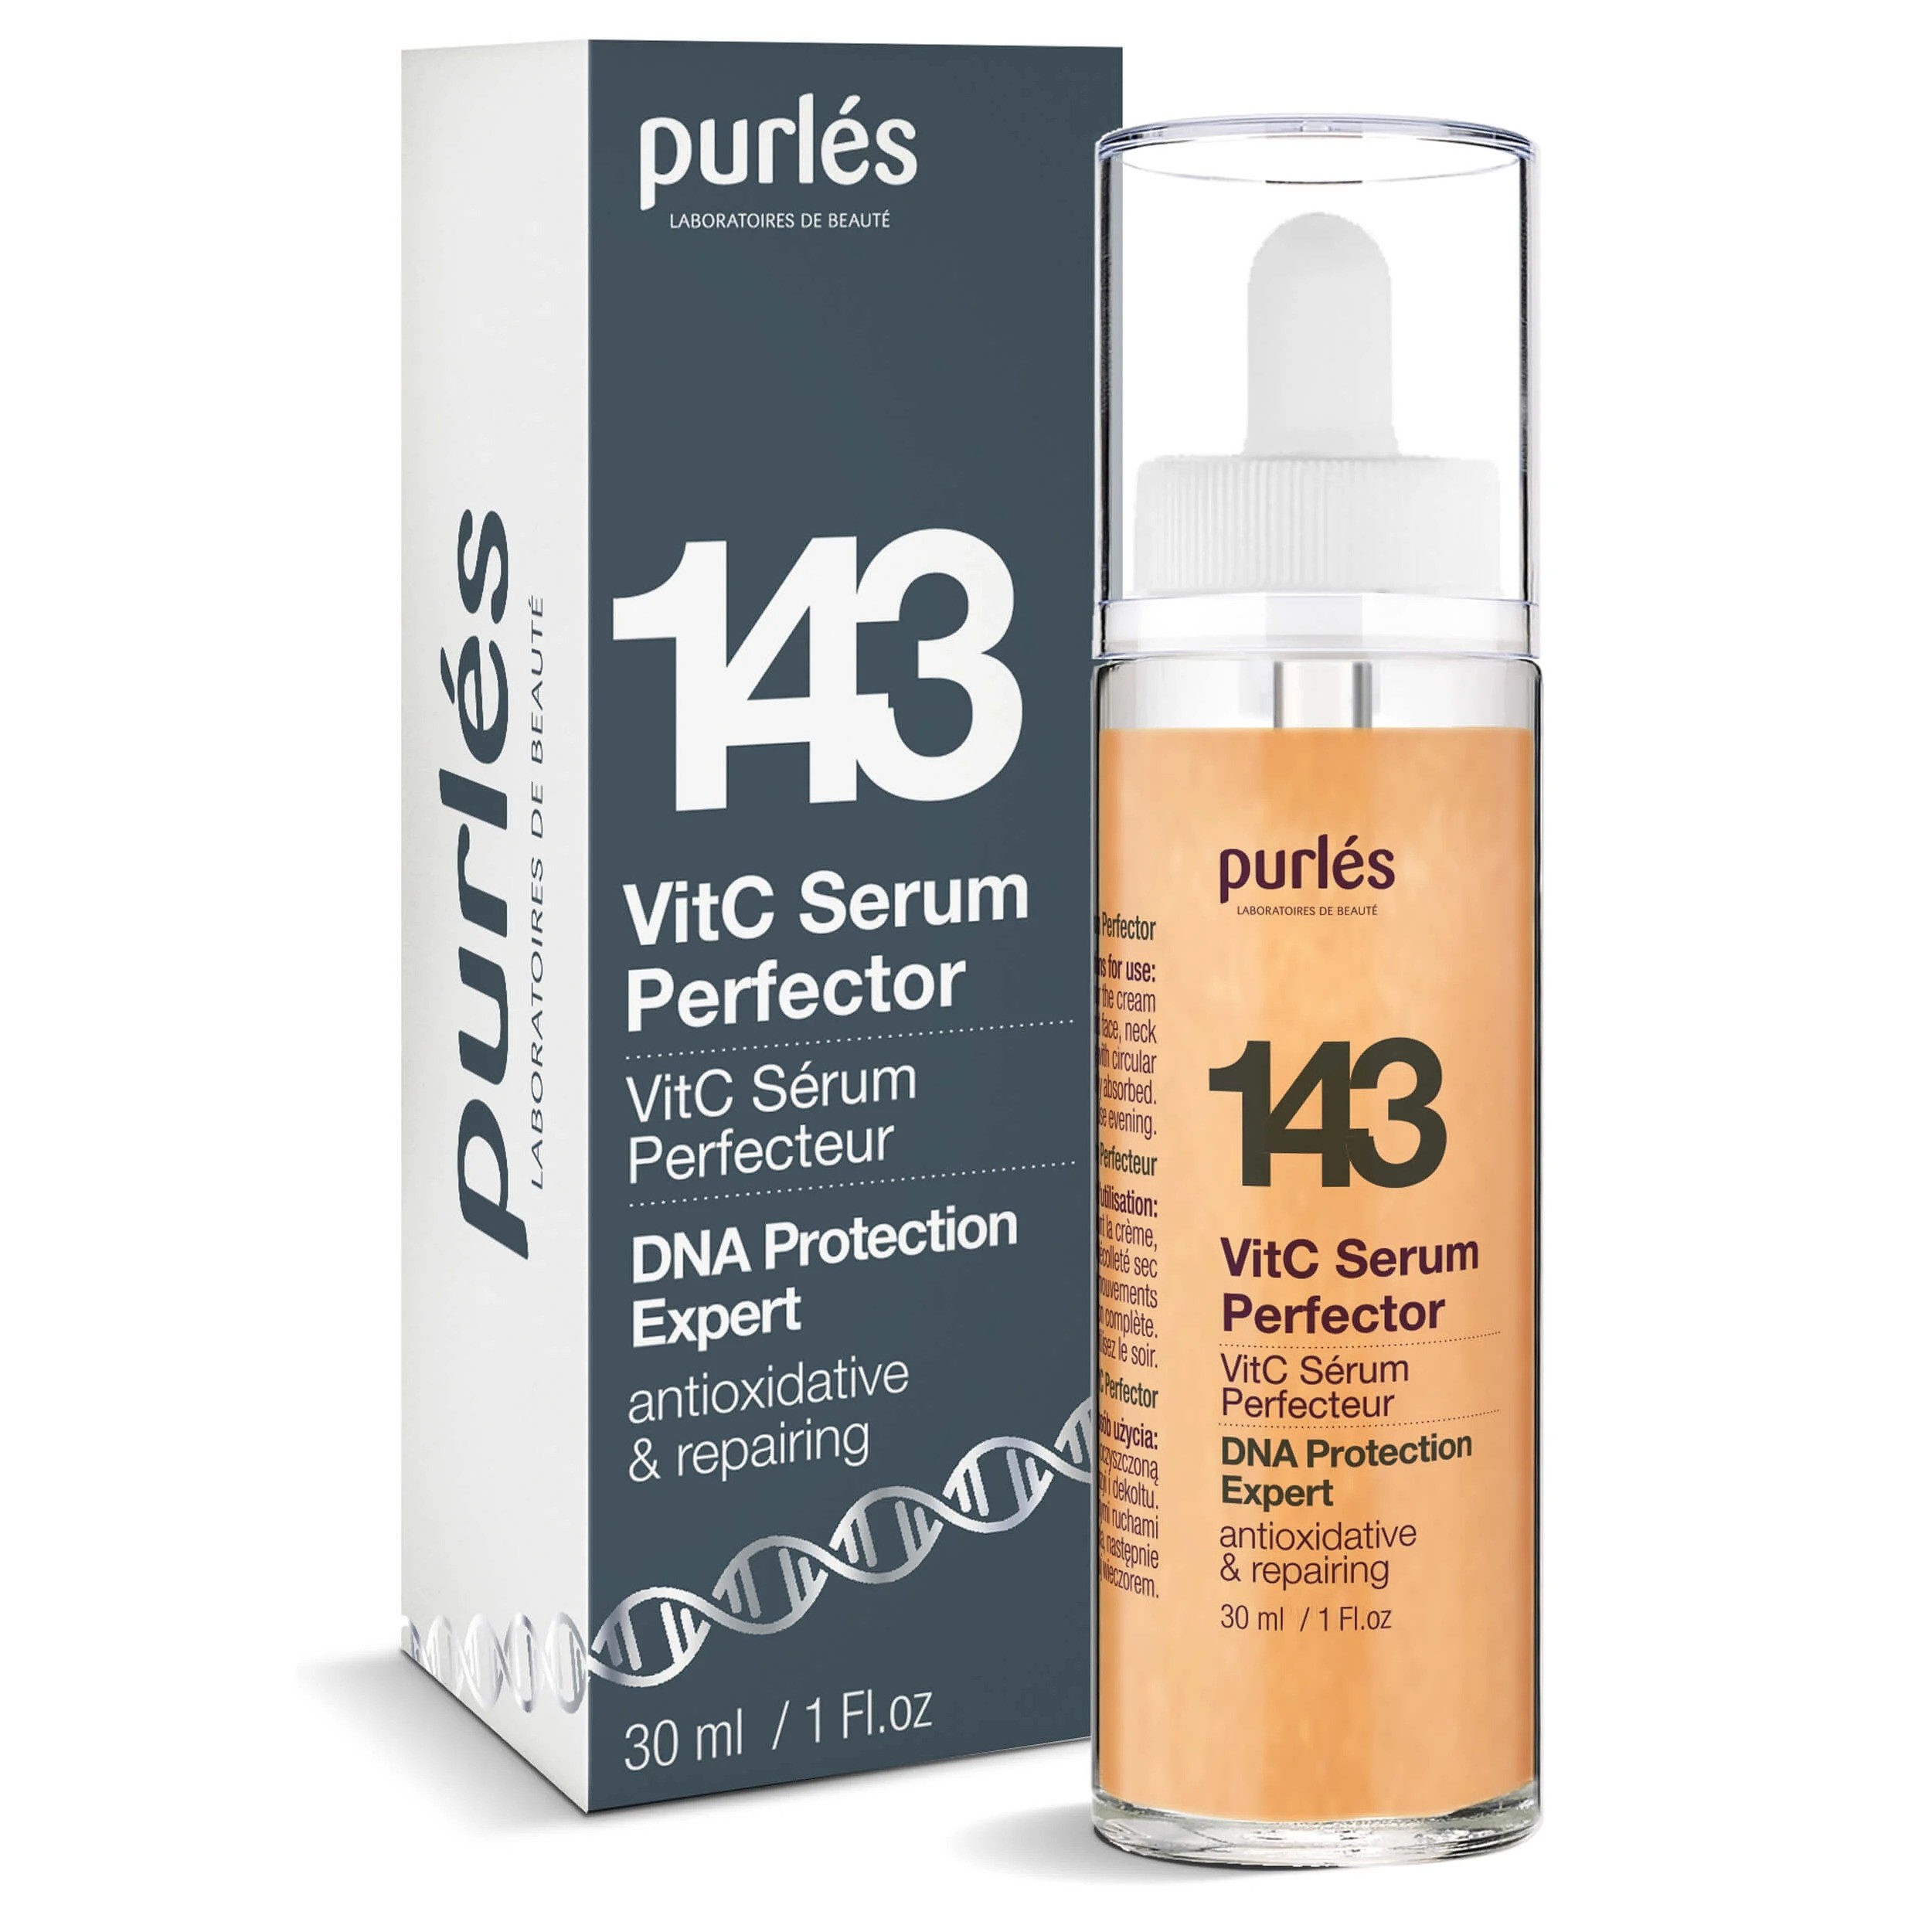 Purles 143 DNA Protection Expert Vit C Serum Perfector For Mature Skin 30ml